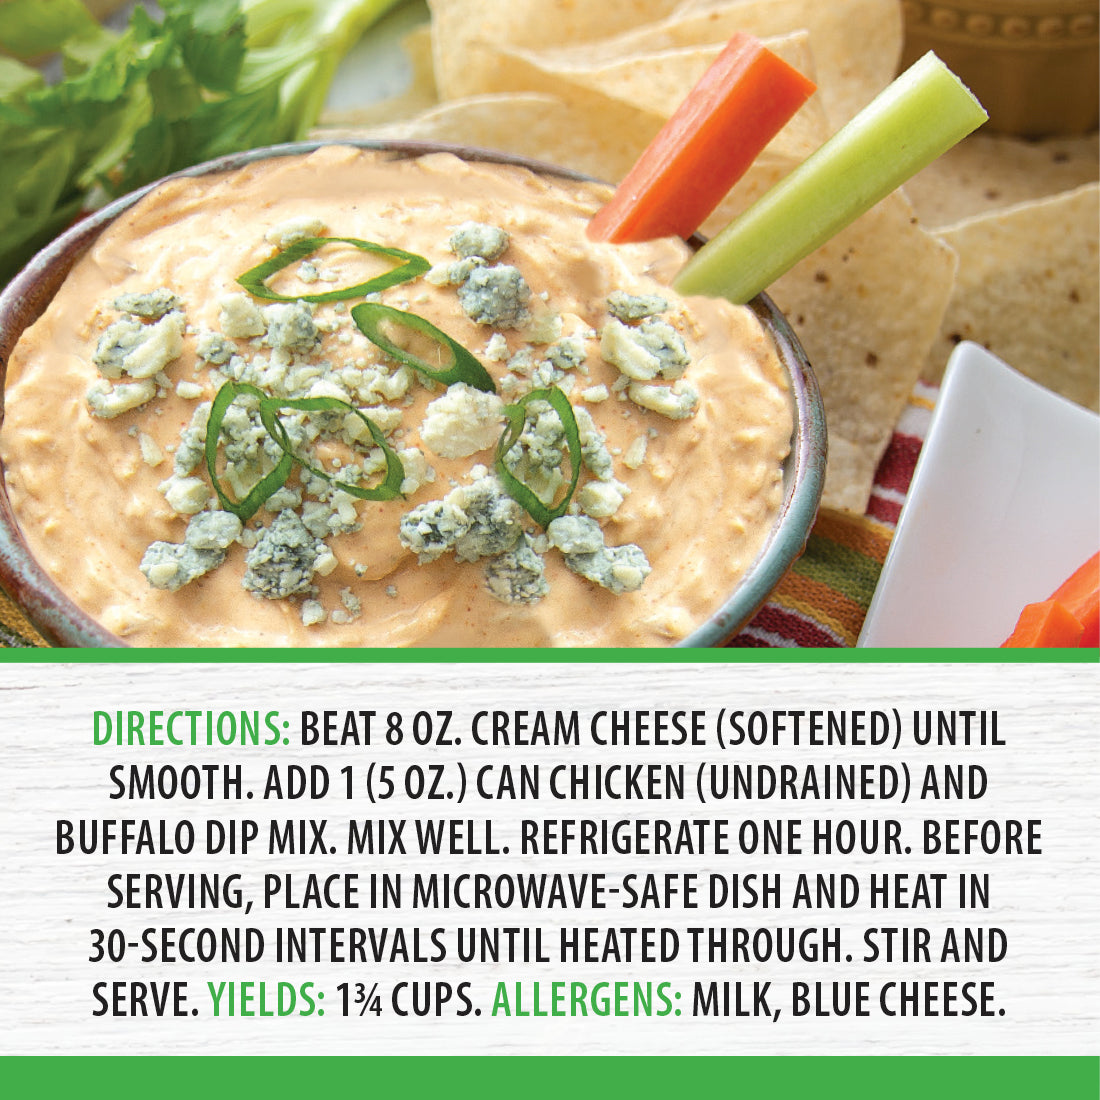 Buffalo Dip Mix stirred into sour cream and garnished with blue cheese and green onions. 